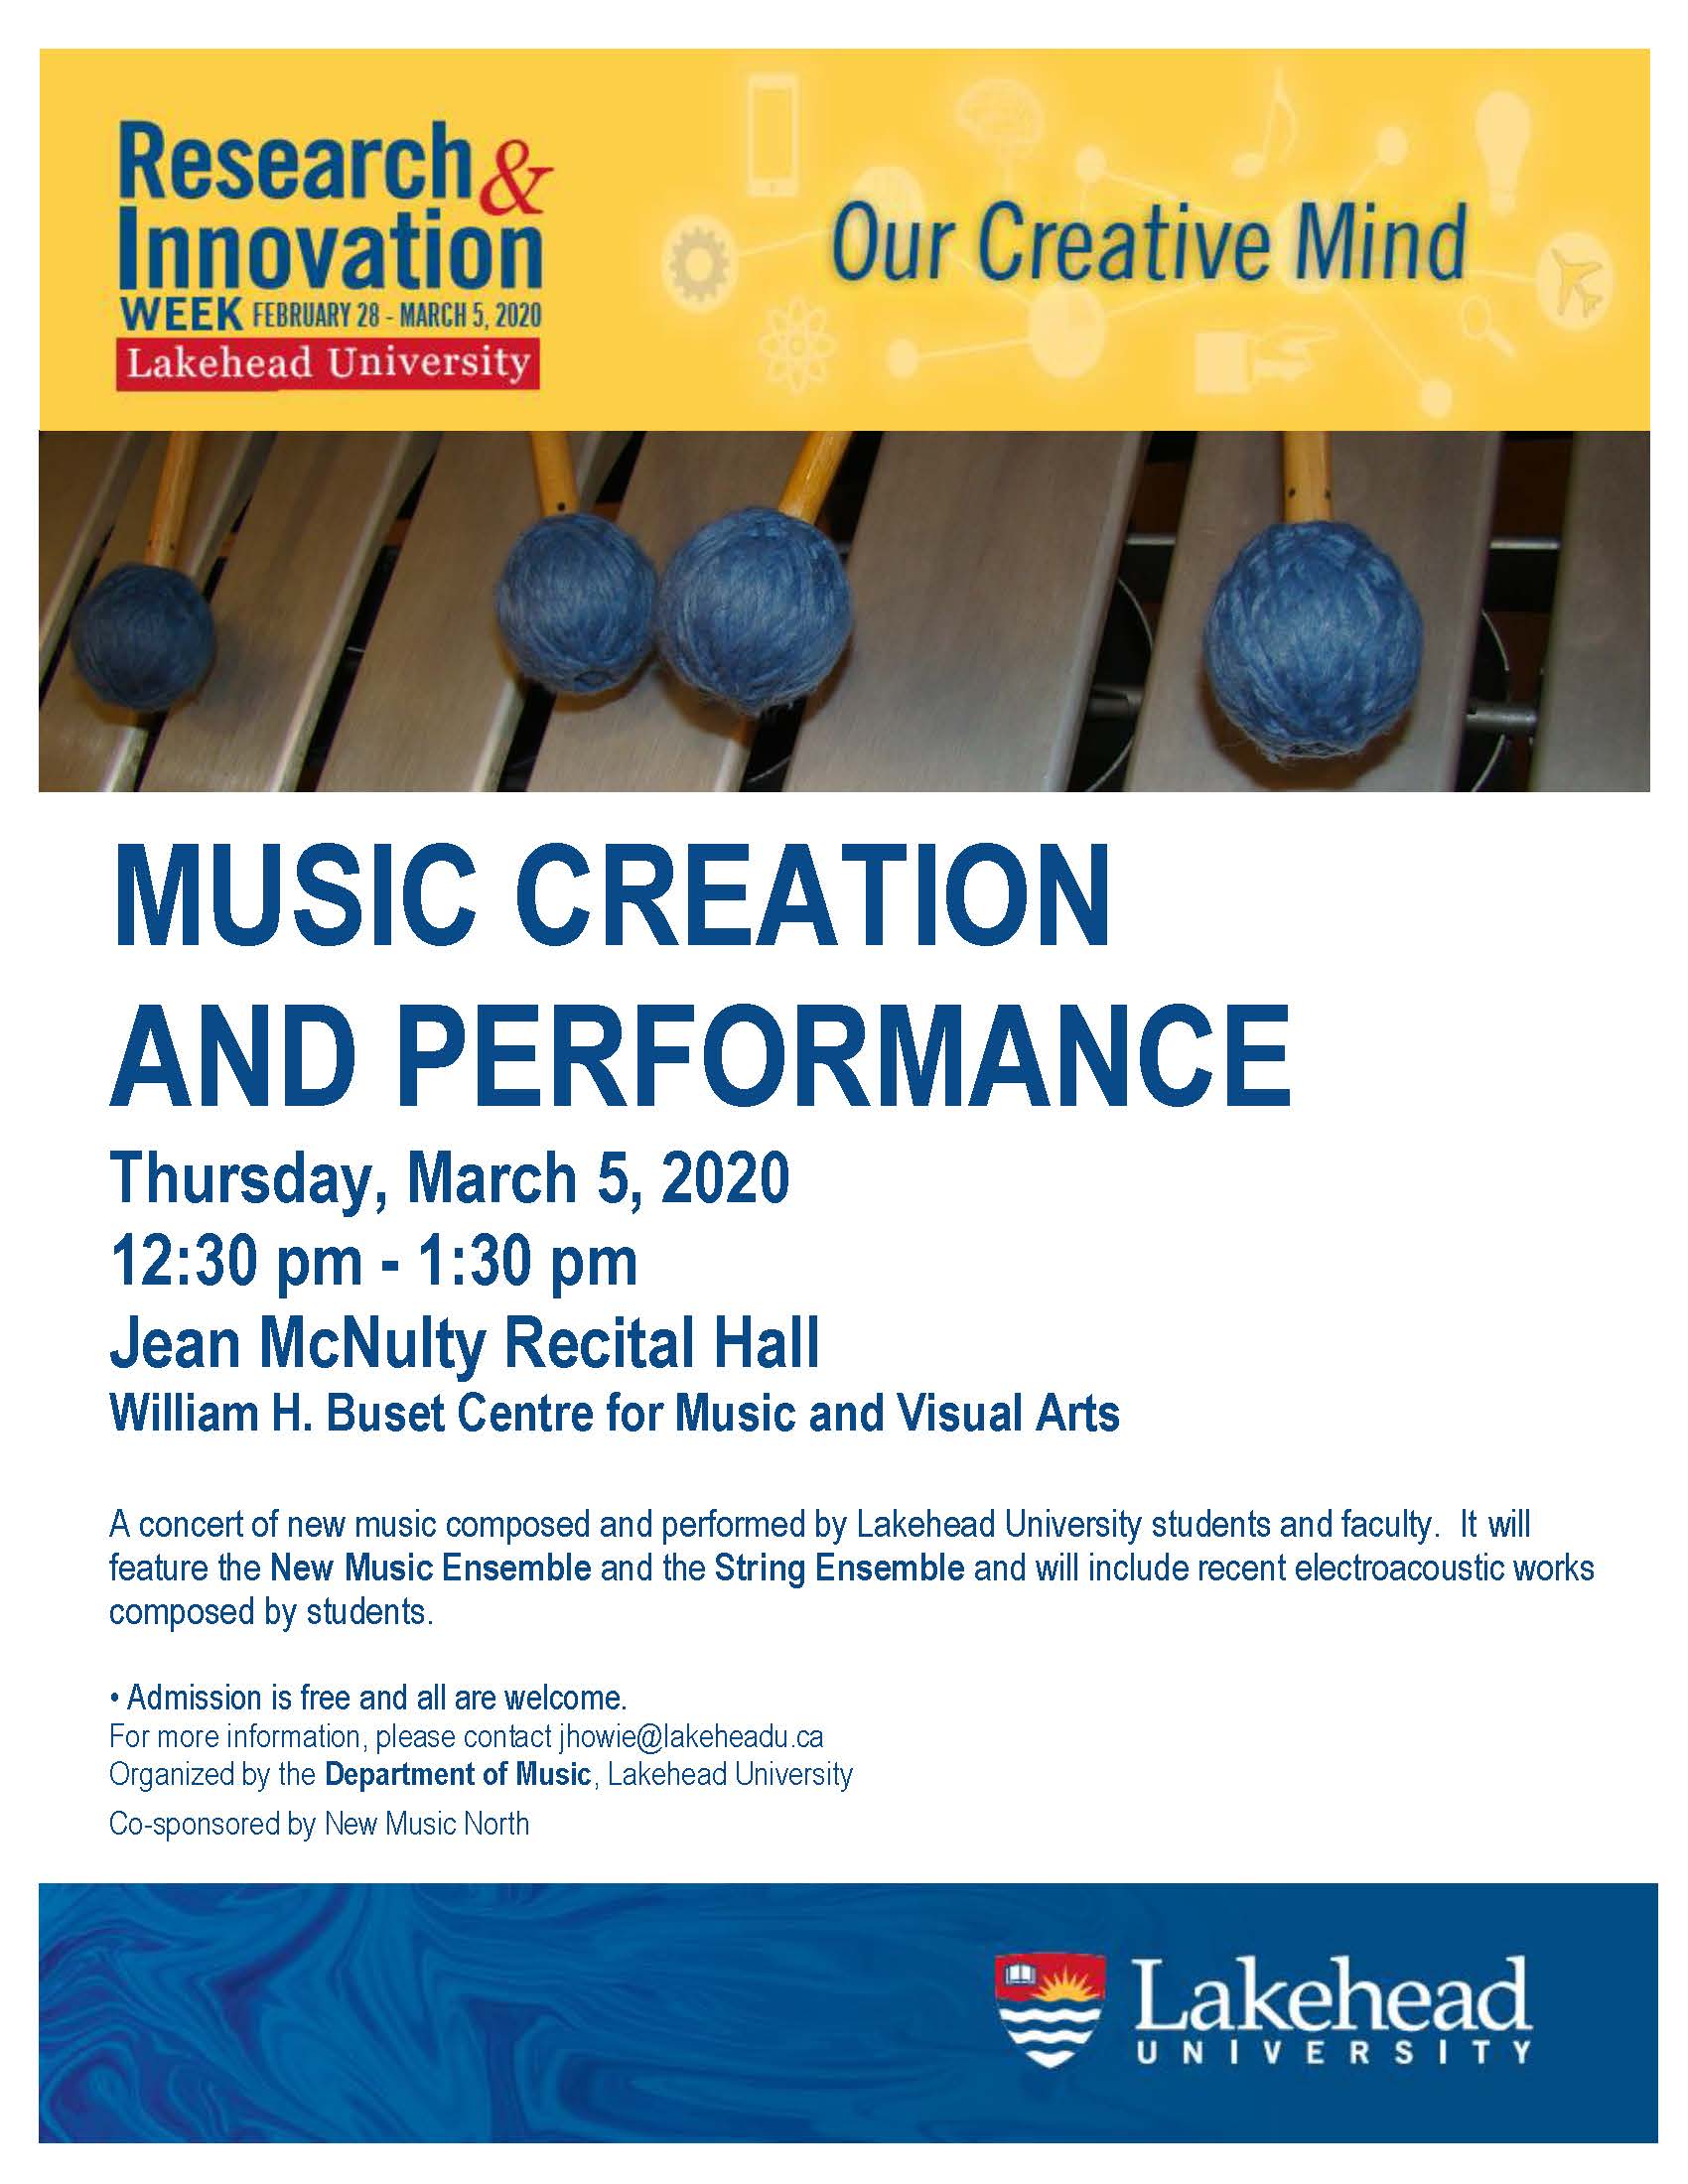 Music Creation and Performance Poster